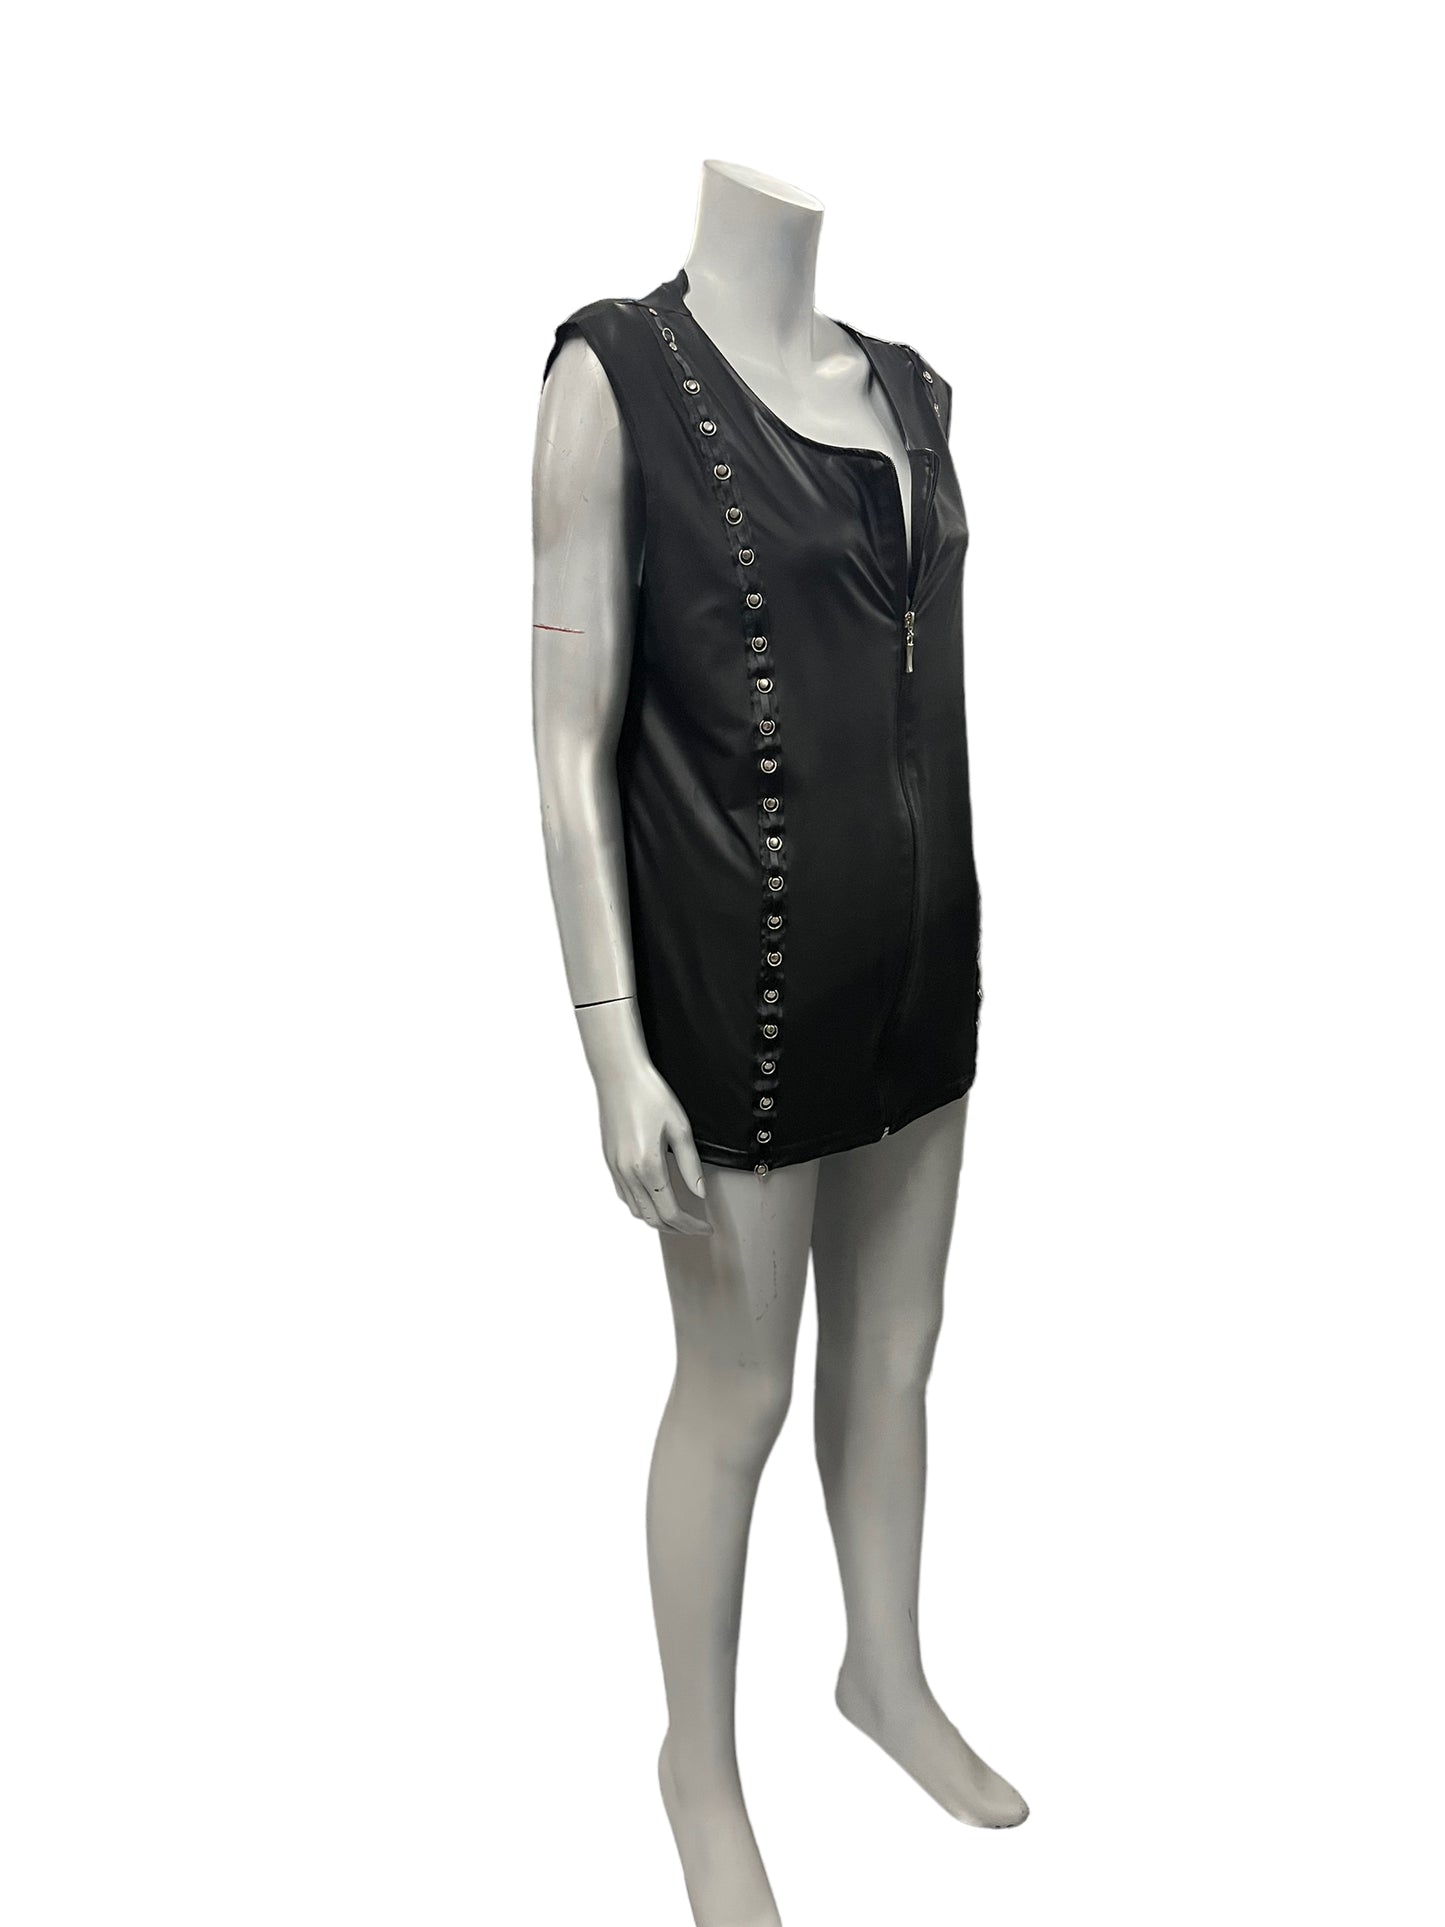 Noir - LL13 - Challenging Black Top with zipper and buttons - Size 6XL.